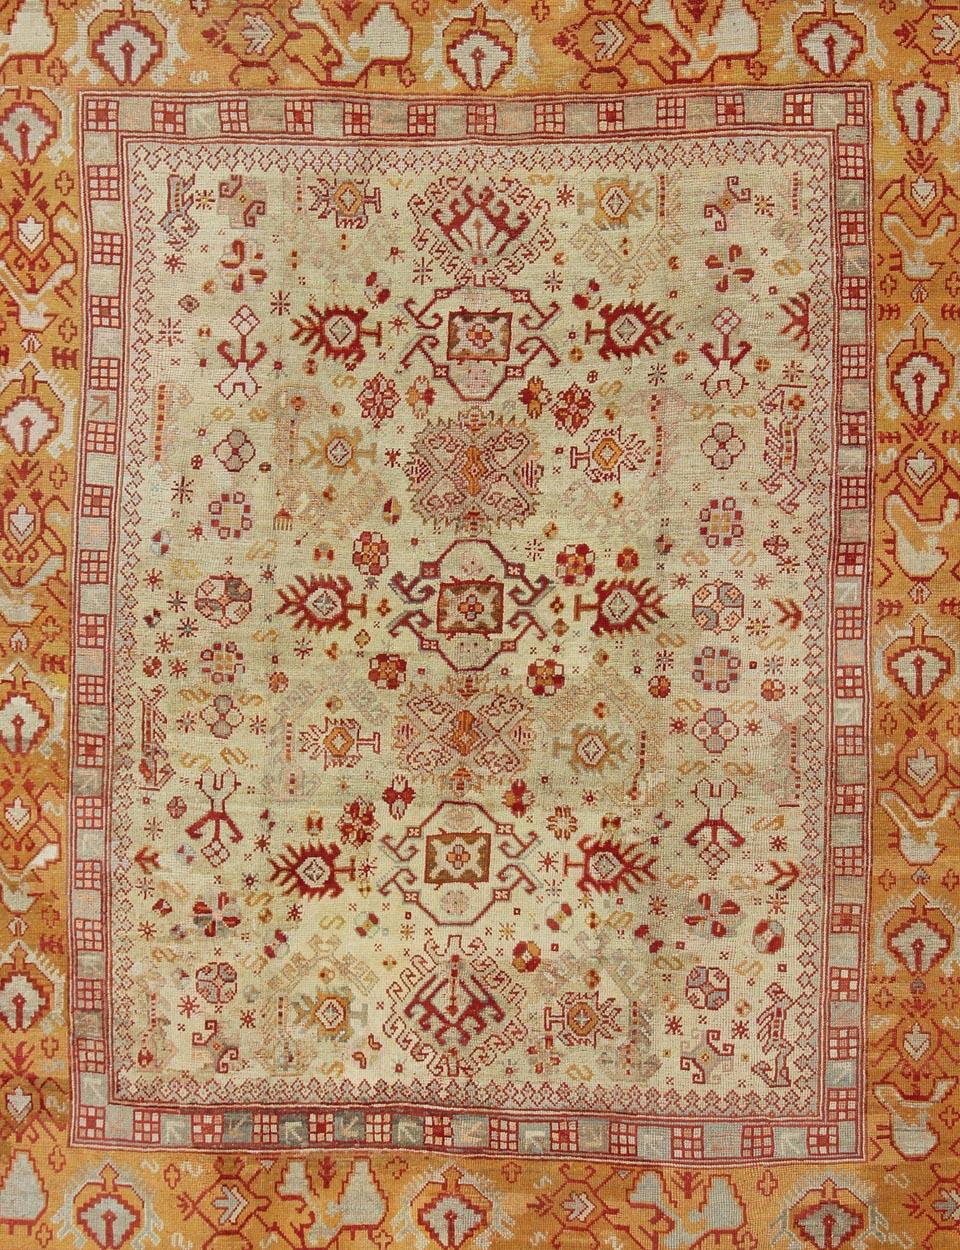 Hand-Knotted Antique Turkish Oushak Carpet With All-Over Design In Red, Taupe, and Orange For Sale